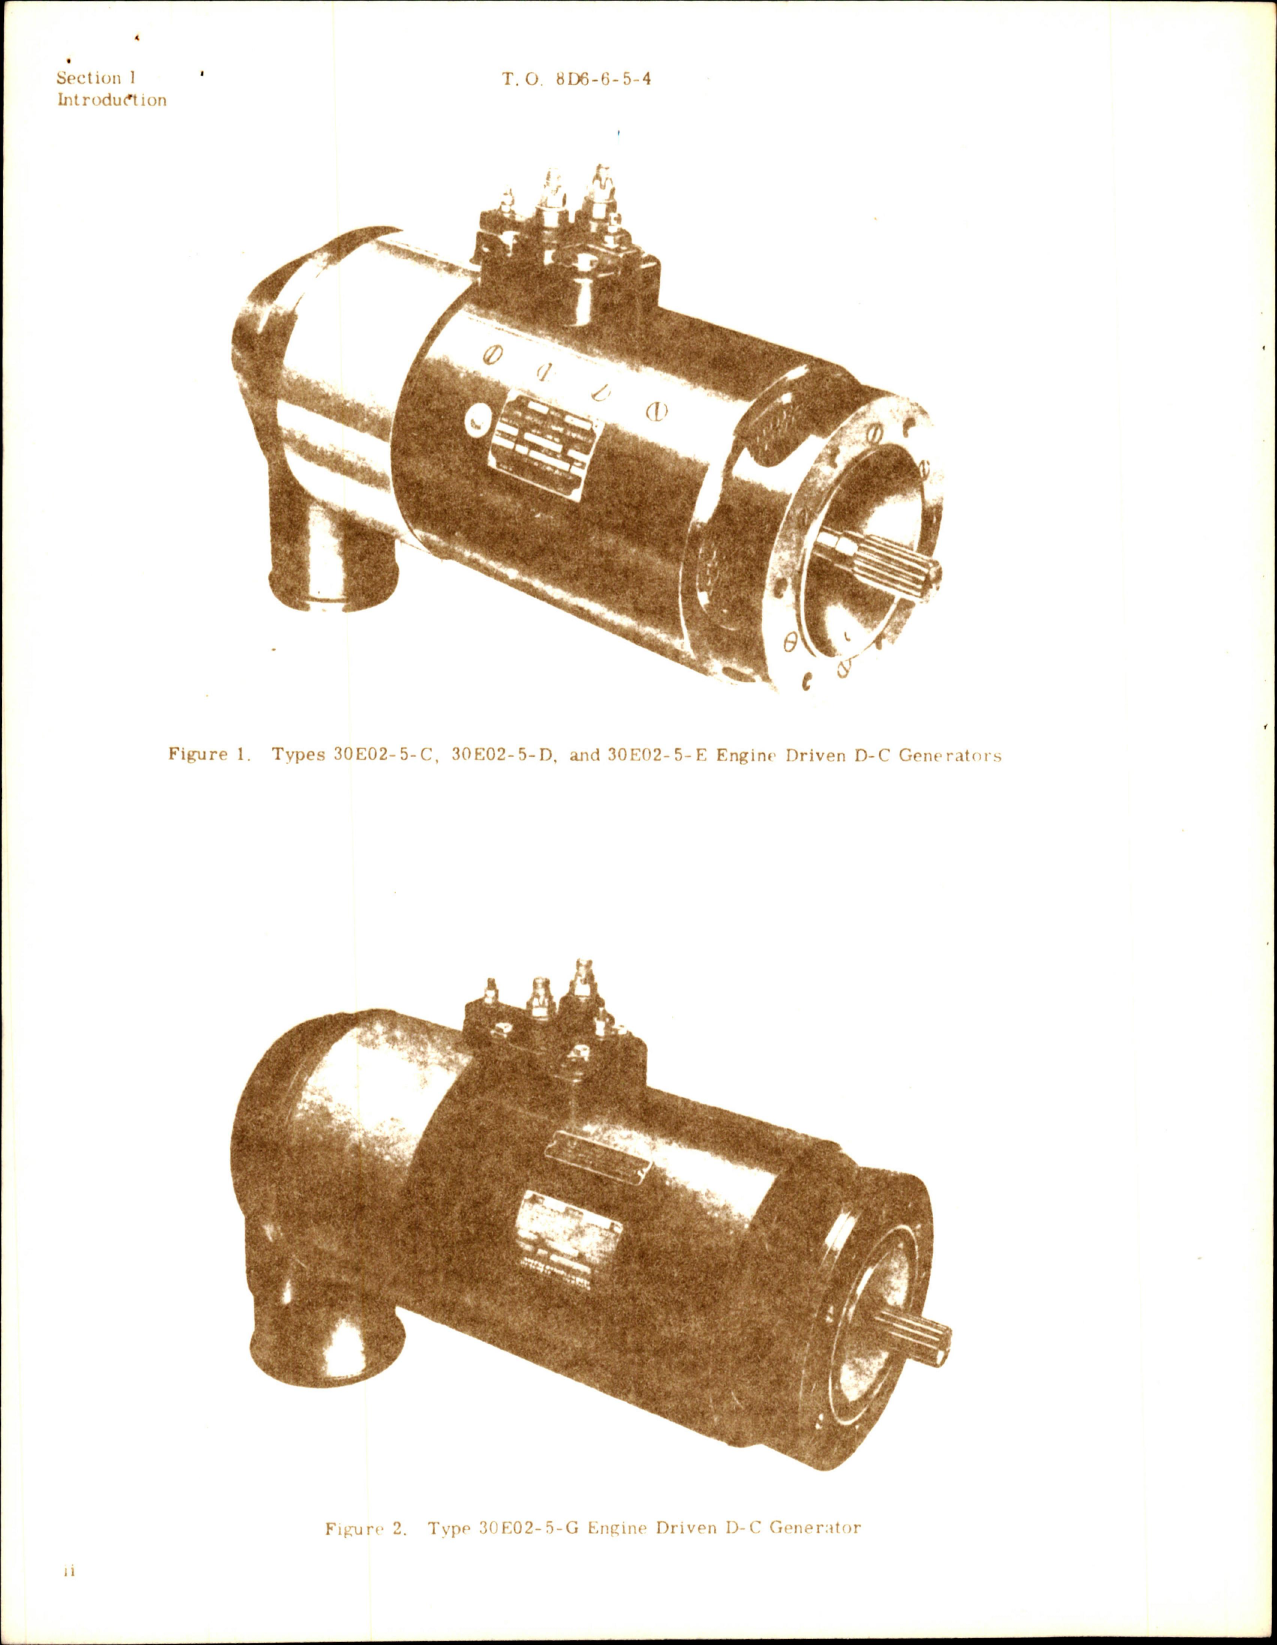 Sample page 7 from AirCorps Library document: Illustrated Parts Breakdown for Engine Driven D-C Generator